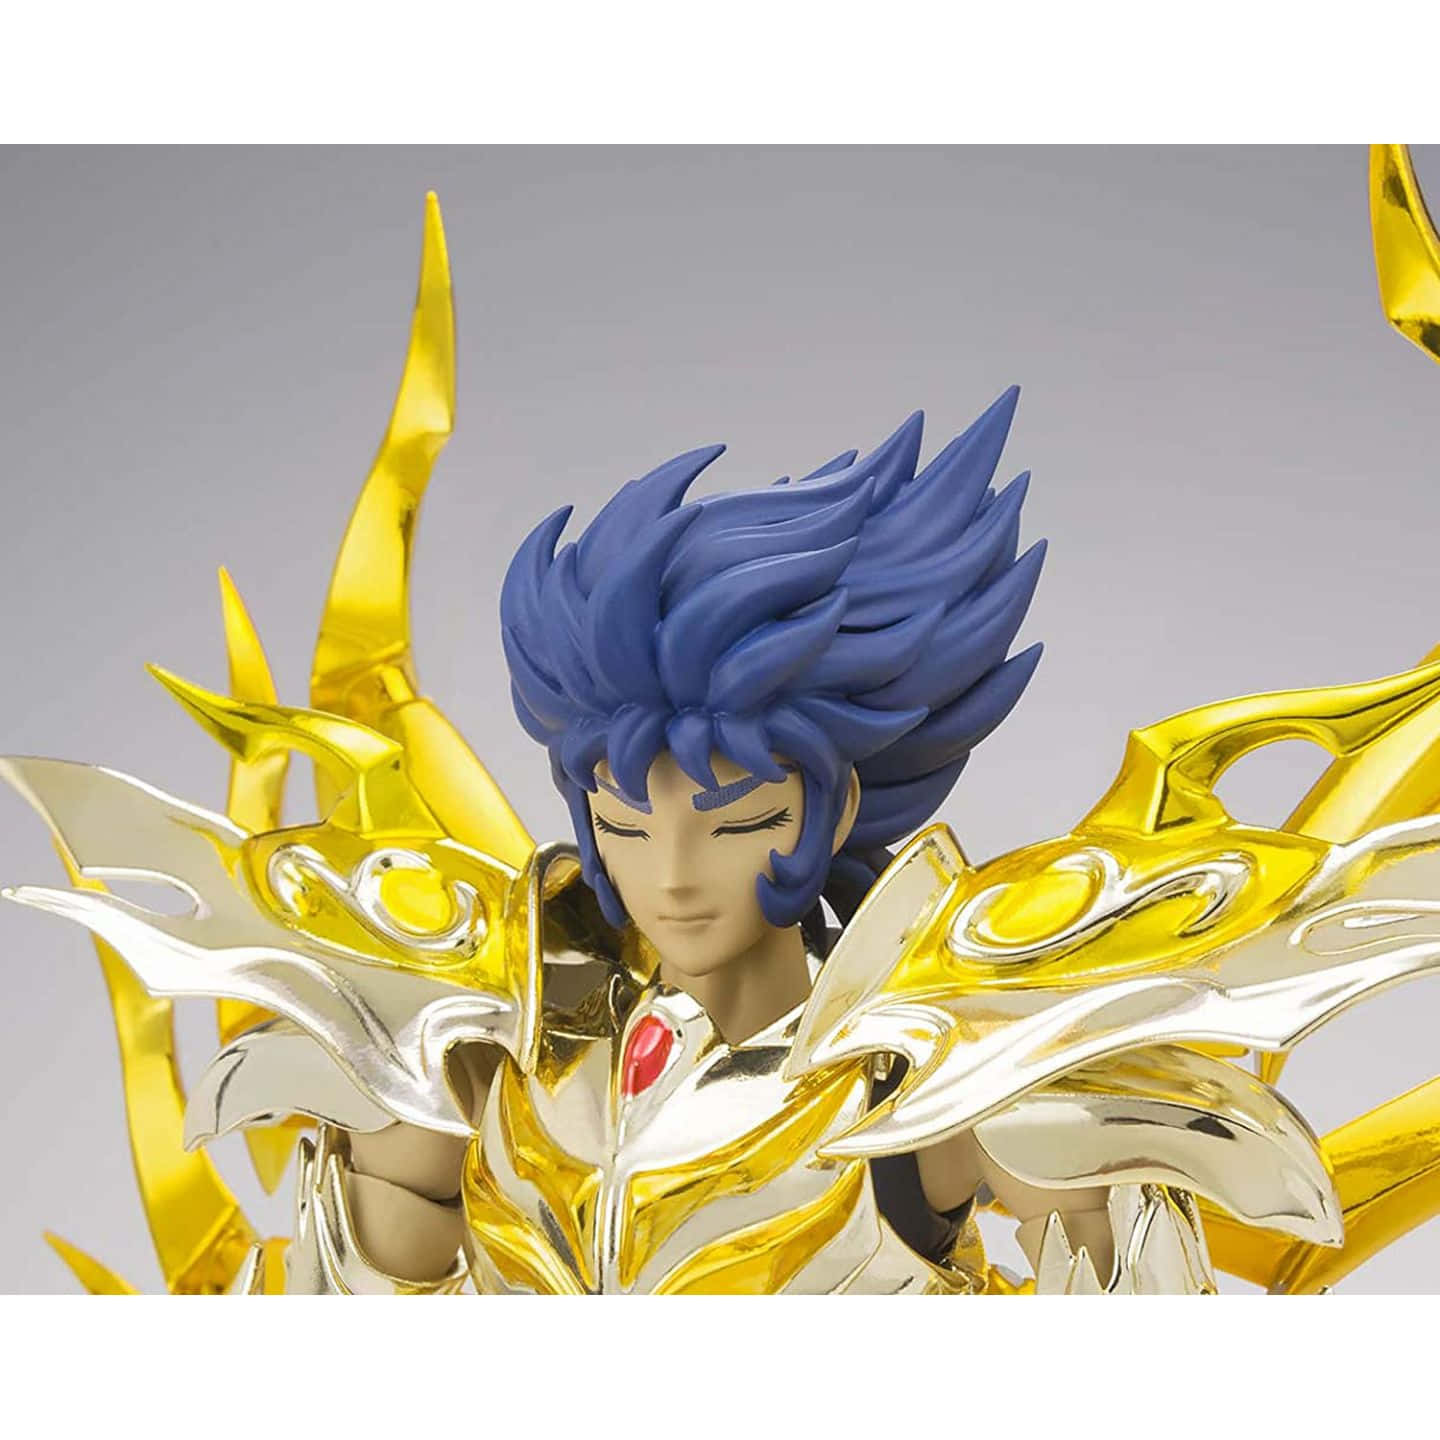 Saint Seiya's Renowned Cancer Deathmask In His Iconic Golden Armor. Wallpaper